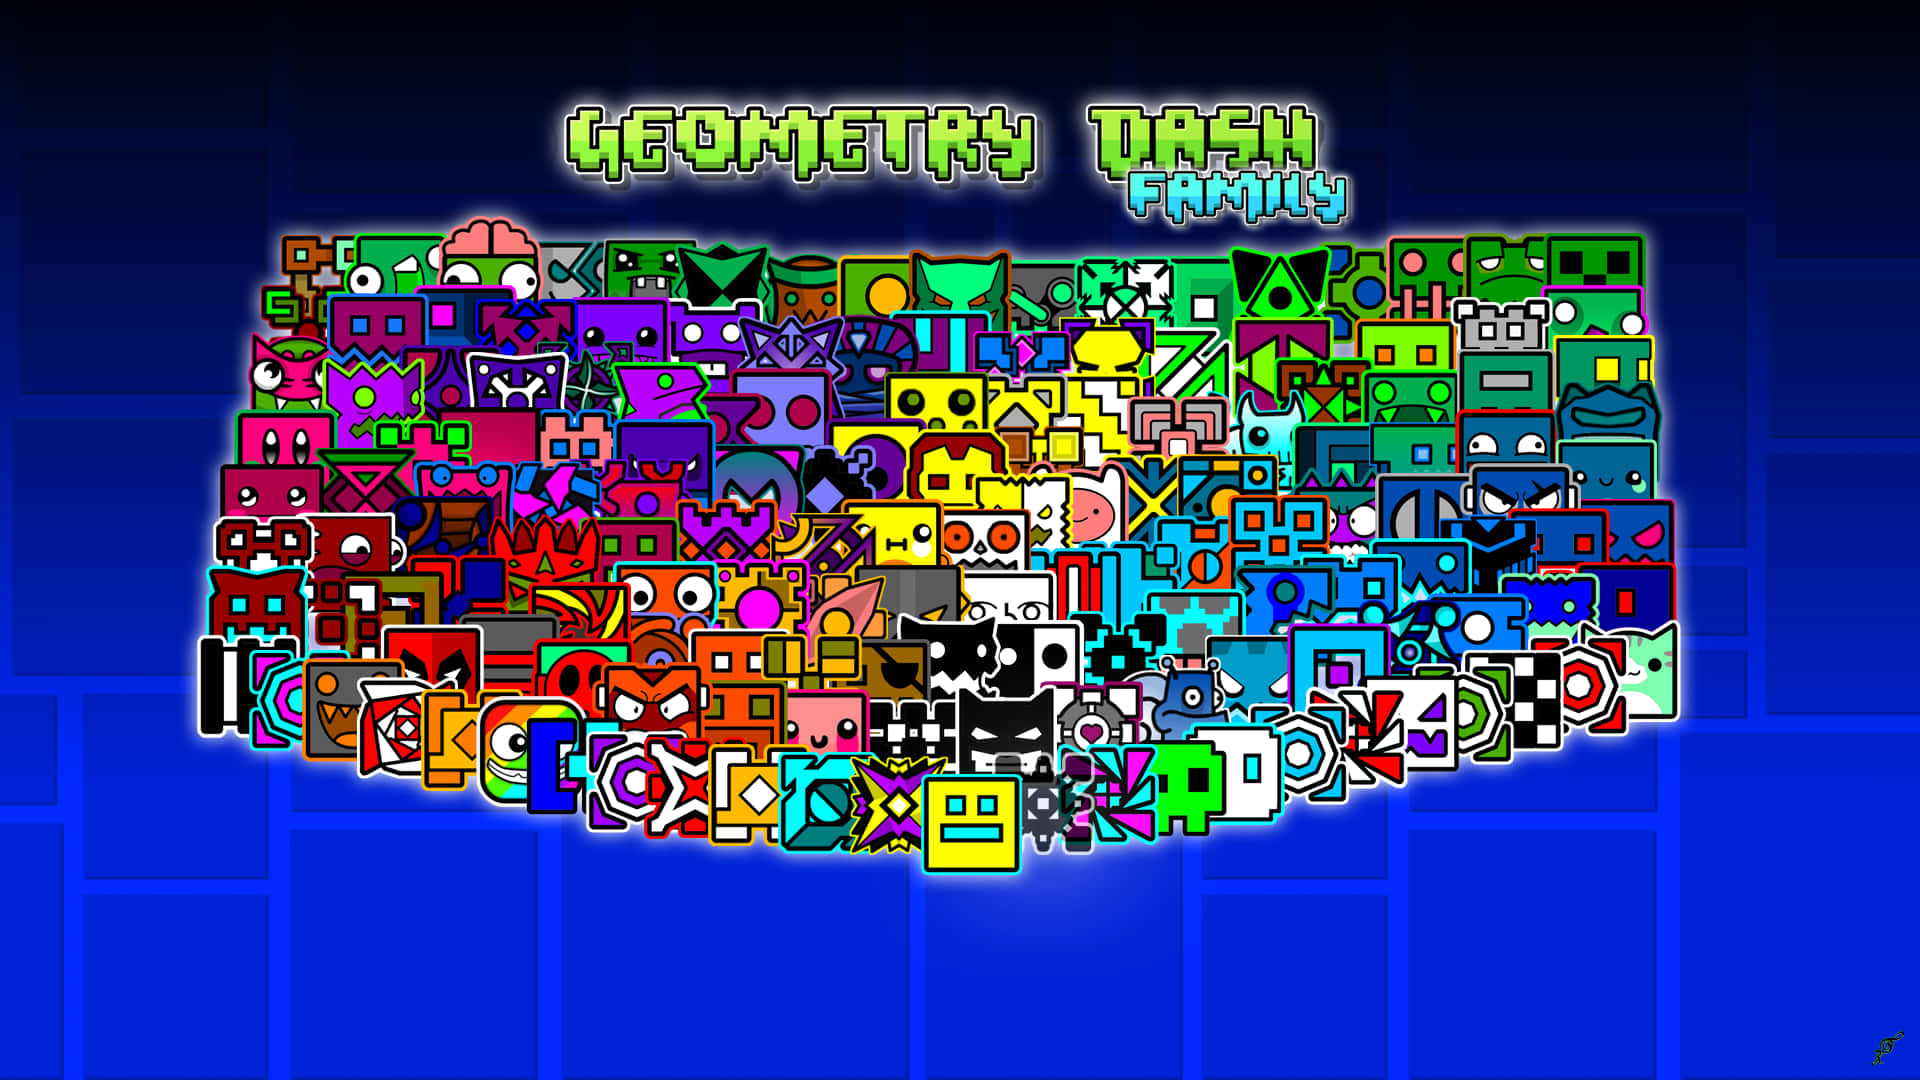 Geometry Dash Wallpaper Discover more Developed Geometry Dash Music  Platforming Video Games wallpaper  Geometry dash wallpaper Black  wallpaper Red and blue